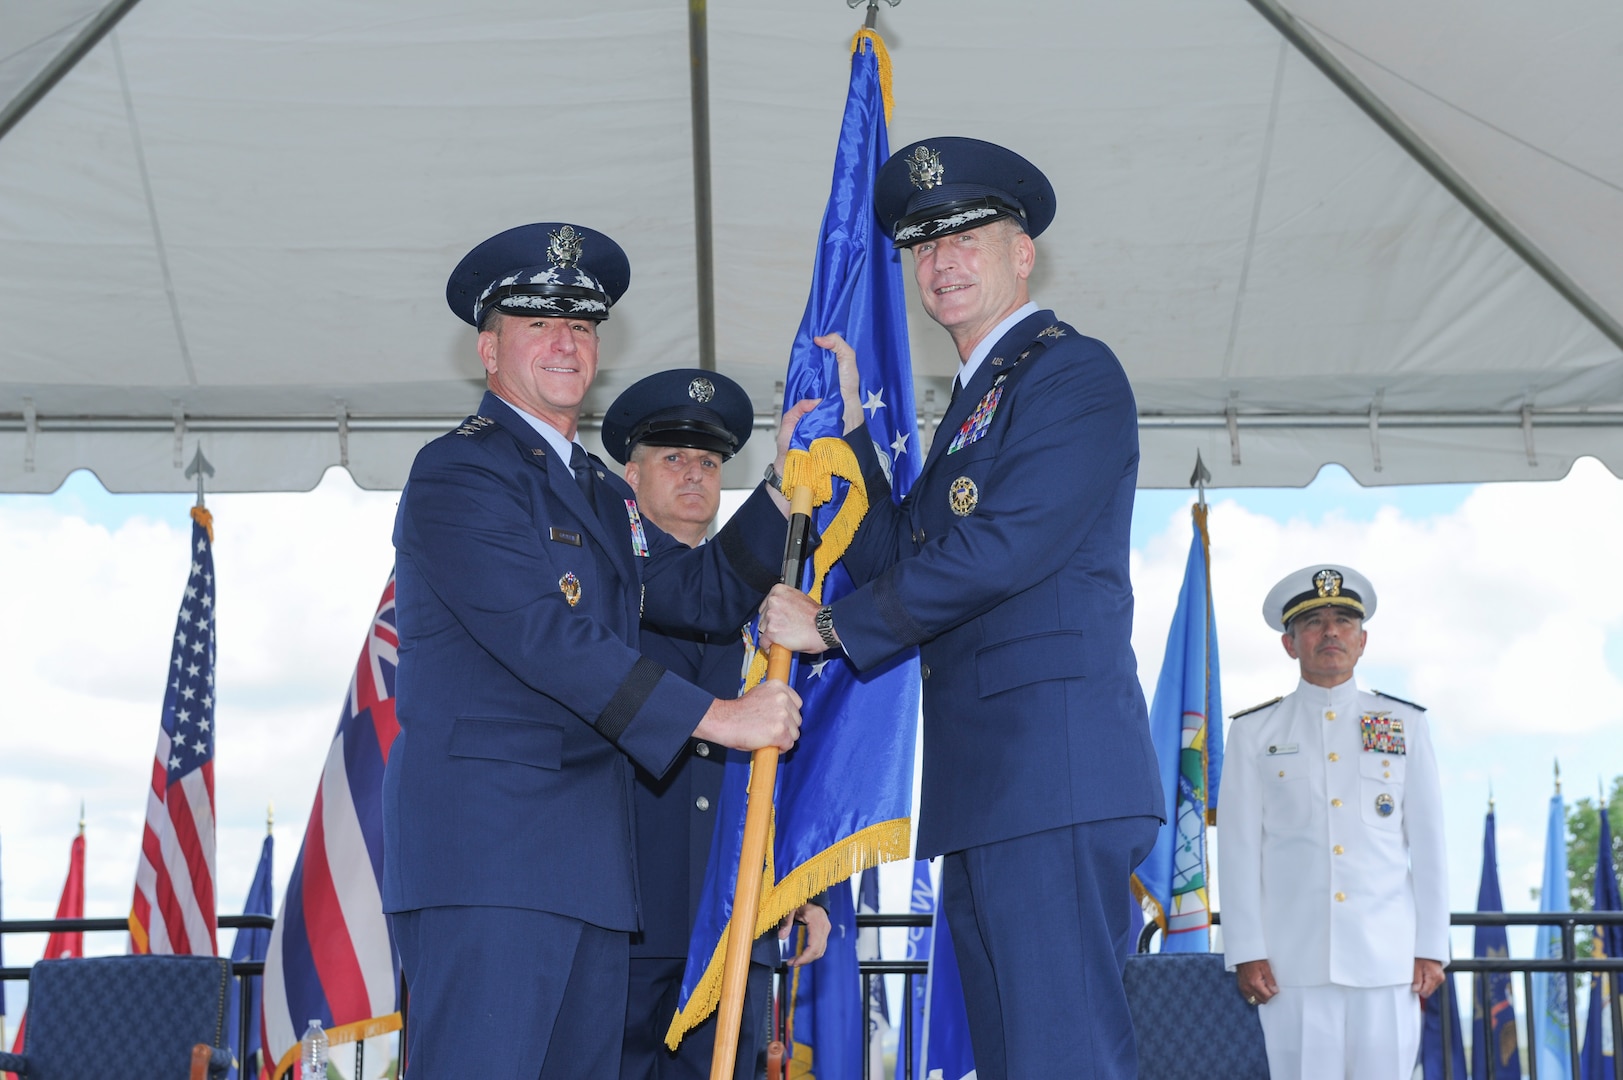 Gen. Terrence J. O’Shaughnessy receives the Pacific Air Forces banner from Gen. David L. Goldfein, U.S. Air Force Chief of Staff, during an assumption-of-command ceremony at Joint Base Pearl Harbor-Hickam, Hawaii, July 12, 2016. O’Shaughnessy was promoted to general prior to the ceremony, attended by Goldfein, and Adm. Harry B. Harris, Jr., U.S. Pacific Command commander. (U.S. Air Force photo by Staff Sgt. Kamaile Chan)